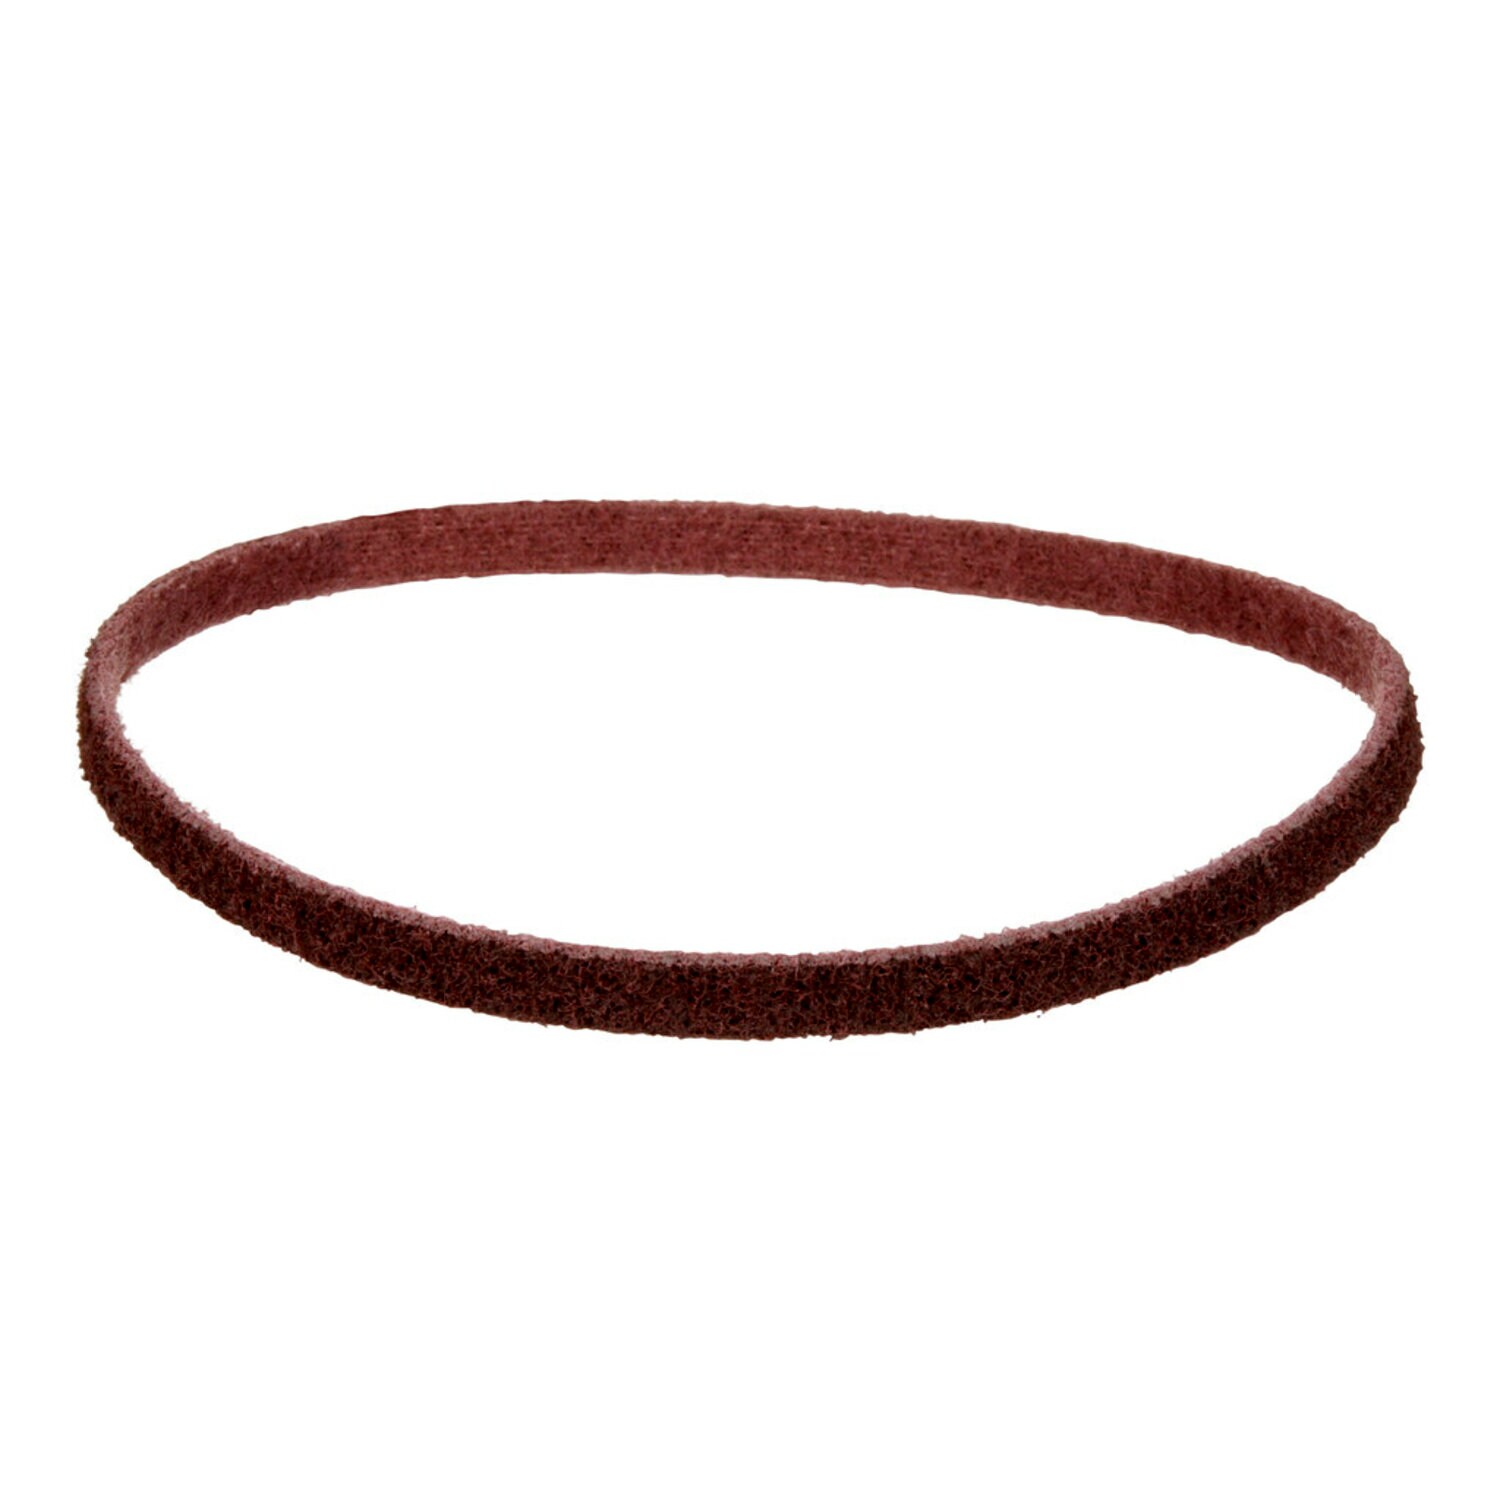 7000121665 - Standard Abrasives Surface Conditioning RC Belt 888052, 1/2 in x 24 in
MED, 10 ea/Case